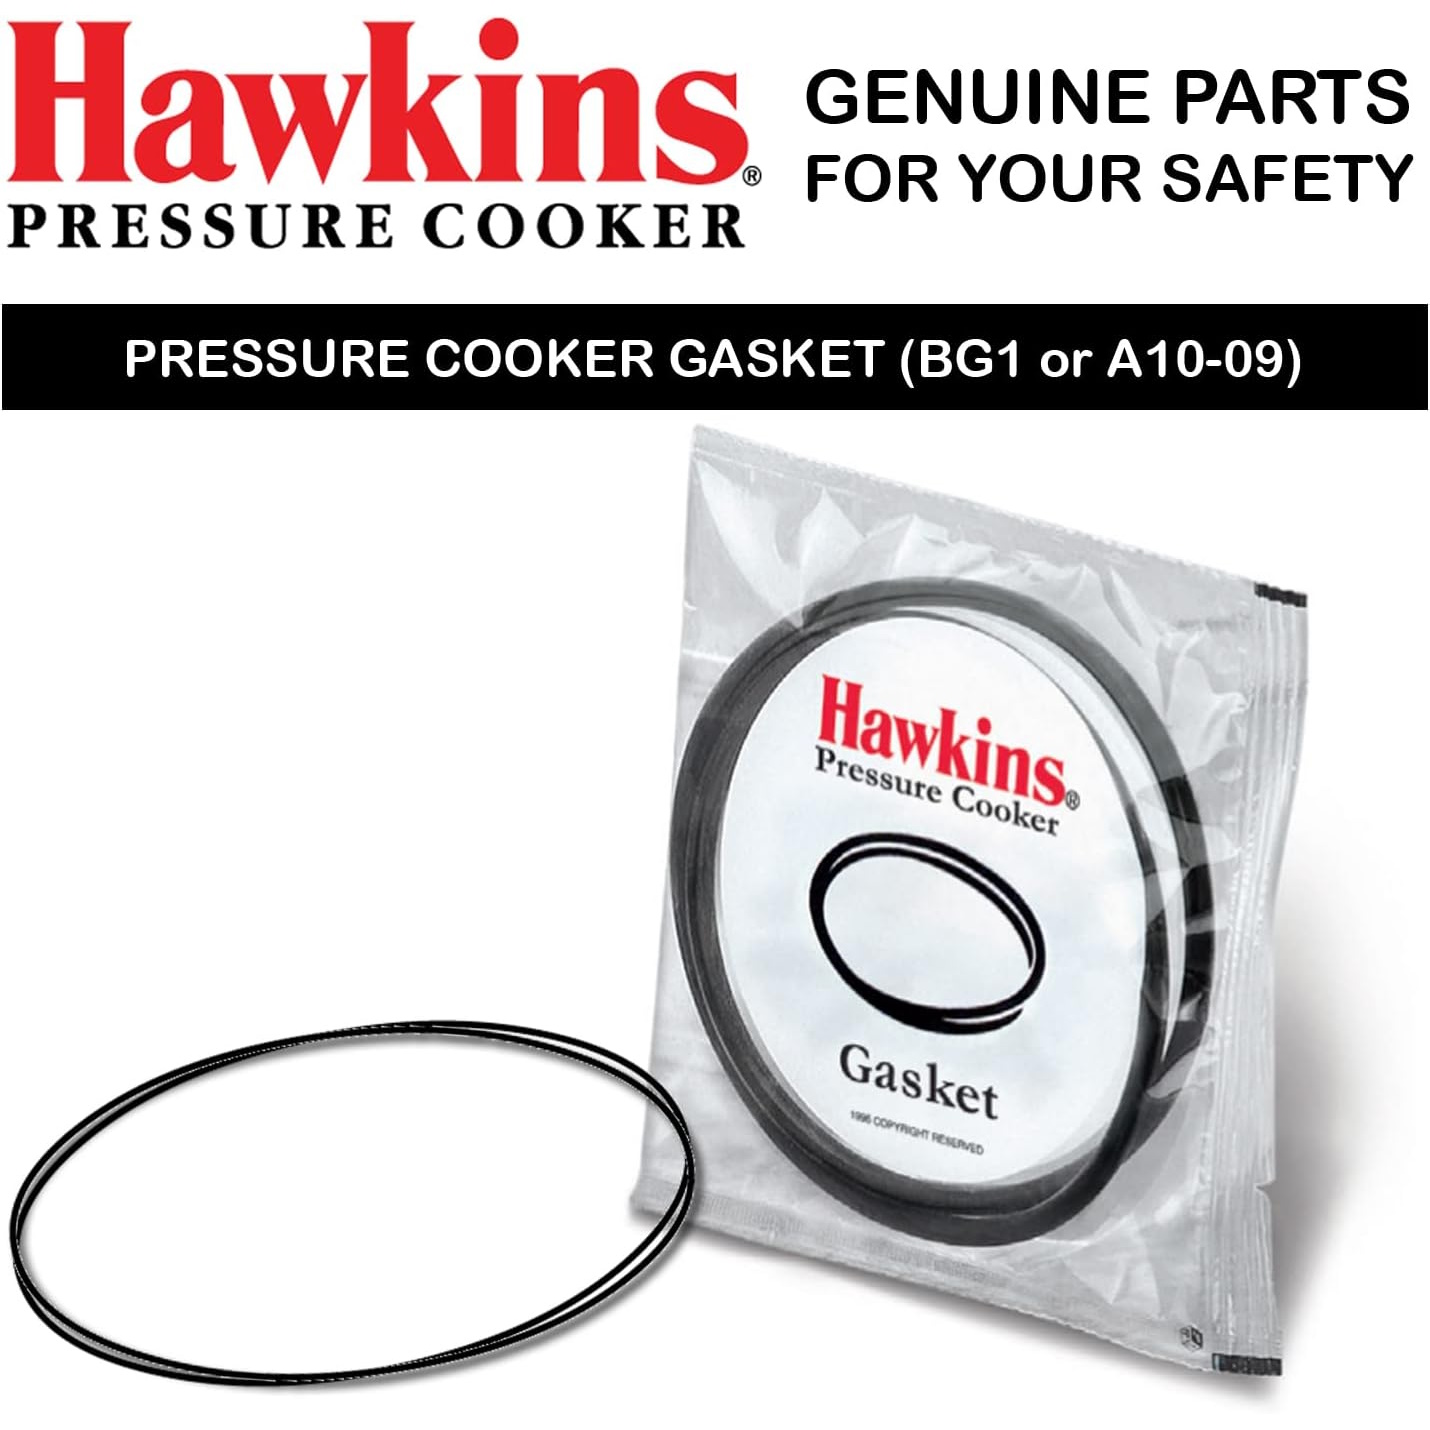 Hawkins Gasket for 2,3,4L P.Cookers